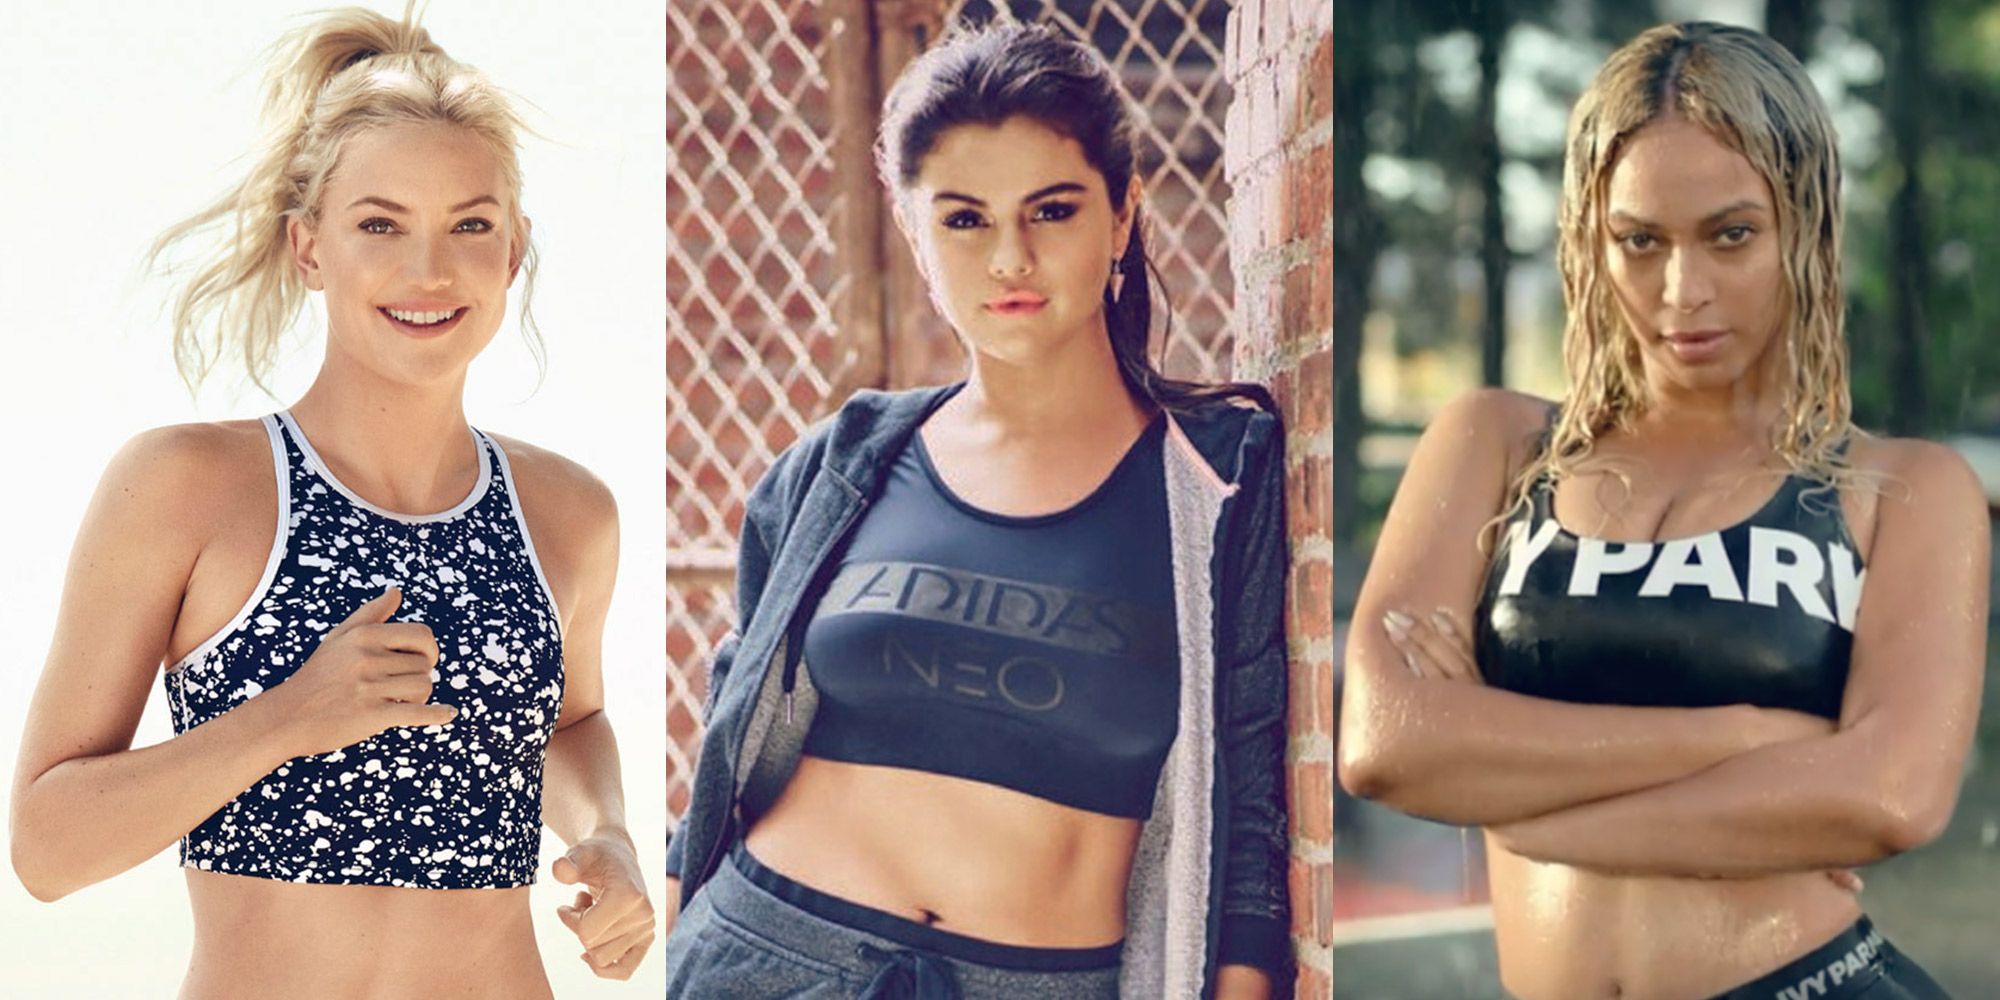 Best workout clothing and equipment, per celebrities